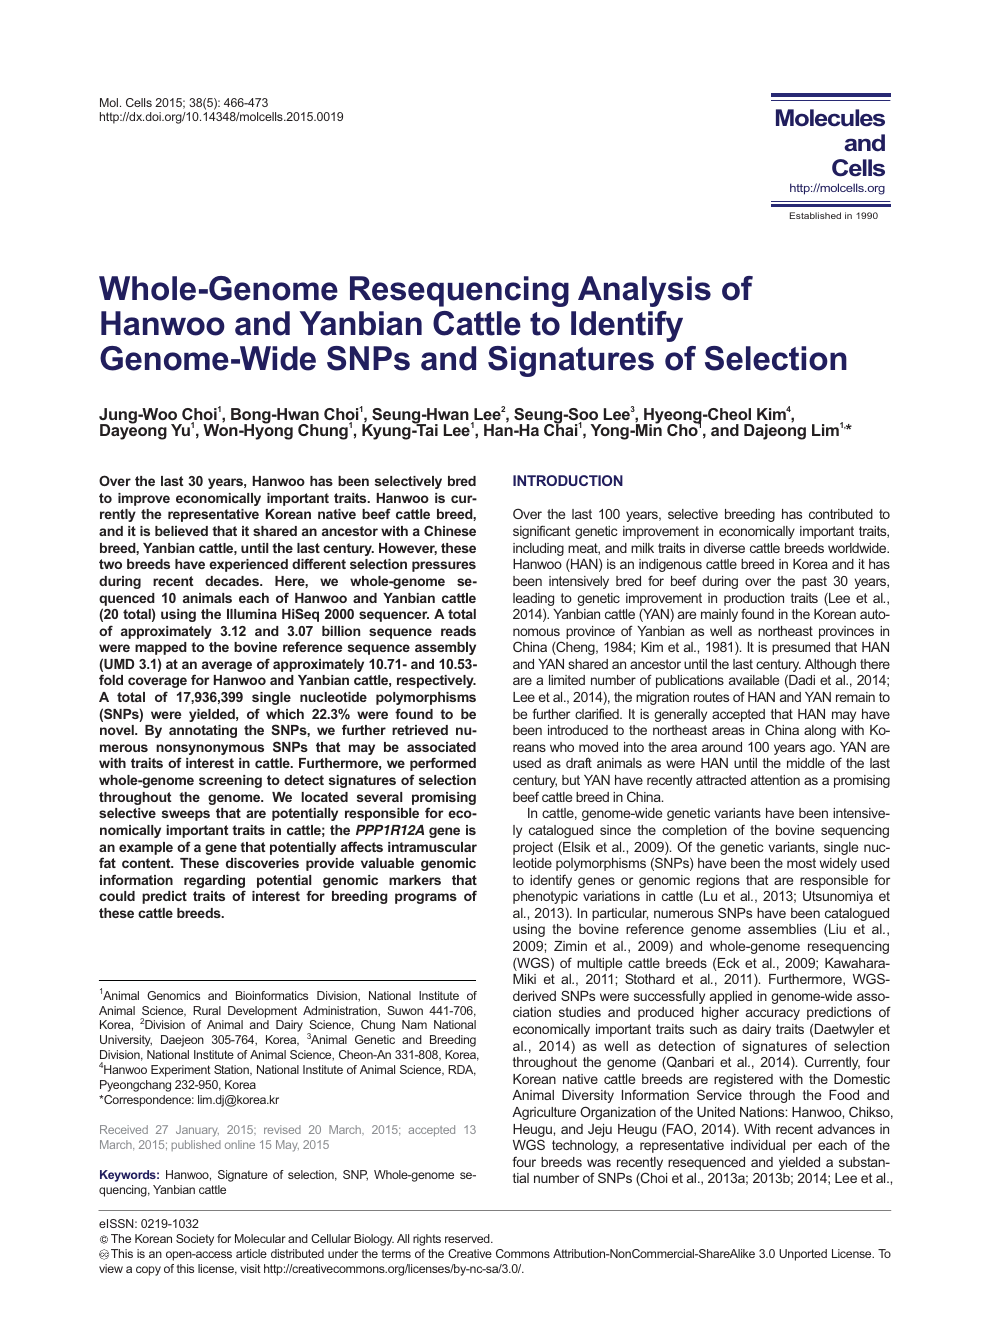 Whole-Genome Resequencing Analysis of Hanwoo and Yanbian Cattle to Identify  Genome-Wide SNPs and Signatures of Selection – topic of research paper in  Biological sciences. Download scholarly article PDF and read for free